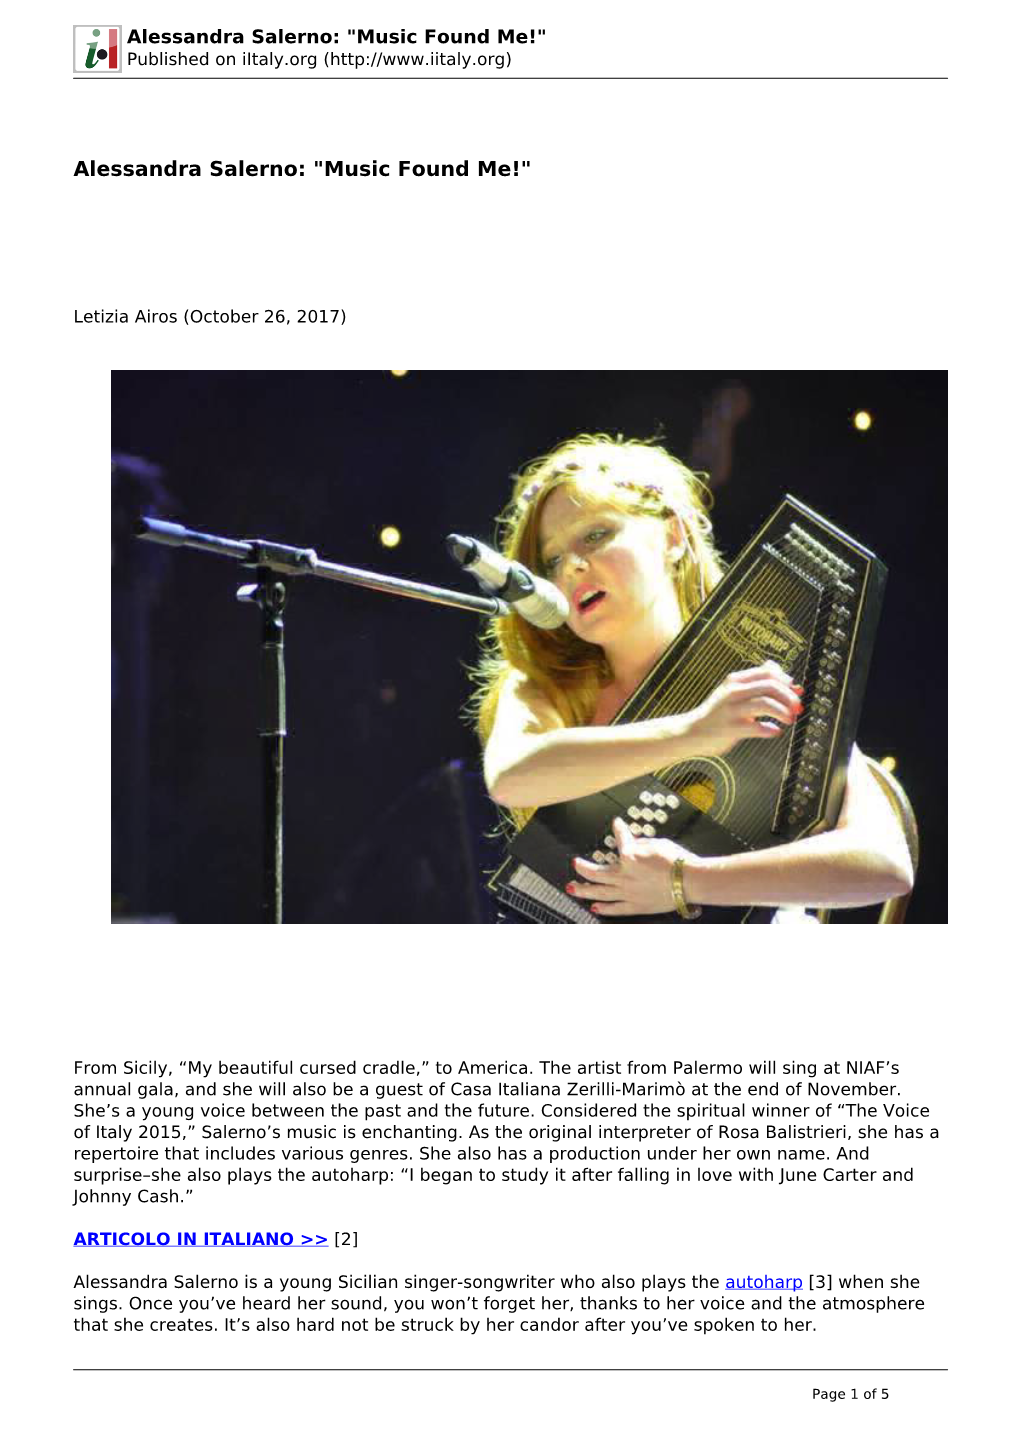 Alessandra Salerno: "Music Found Me!" Published on Iitaly.Org (